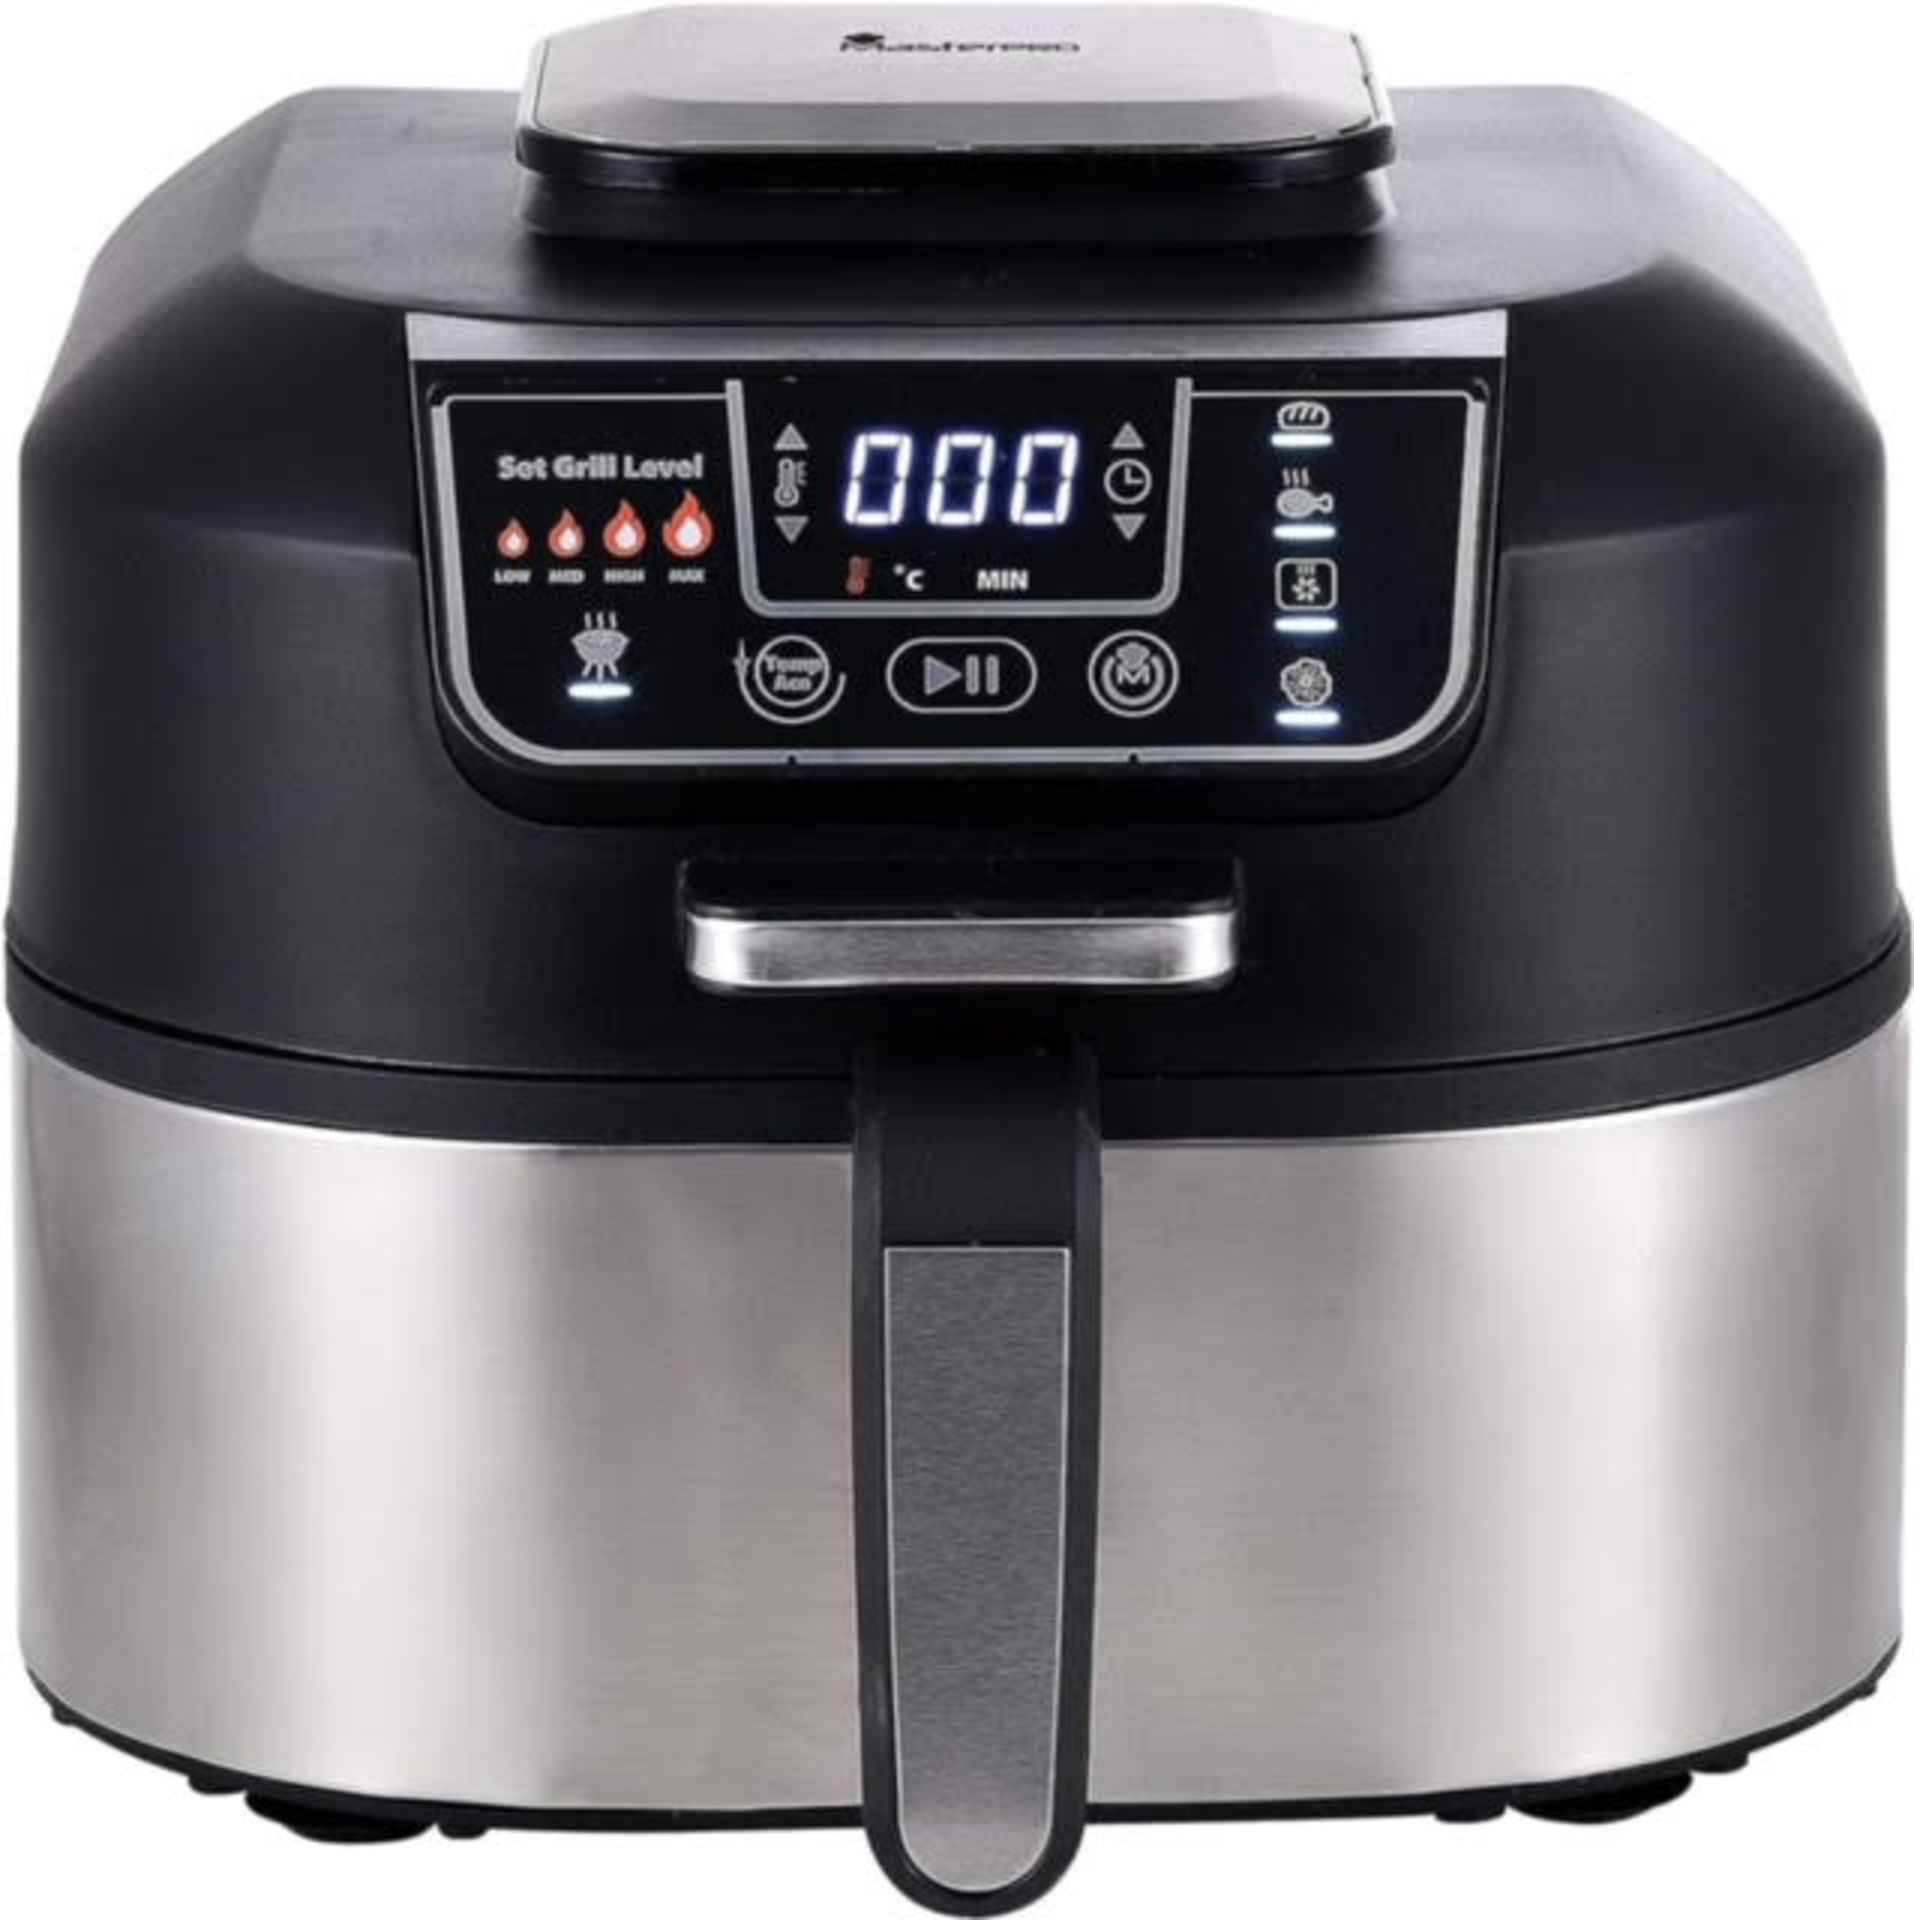 4 X MASTERPRO SMOKELESS GRILL, 5.6 LITRE, 1760 W, ONE TOUCH FOOD PROCESSOR RRP £160 each *NO VAT*